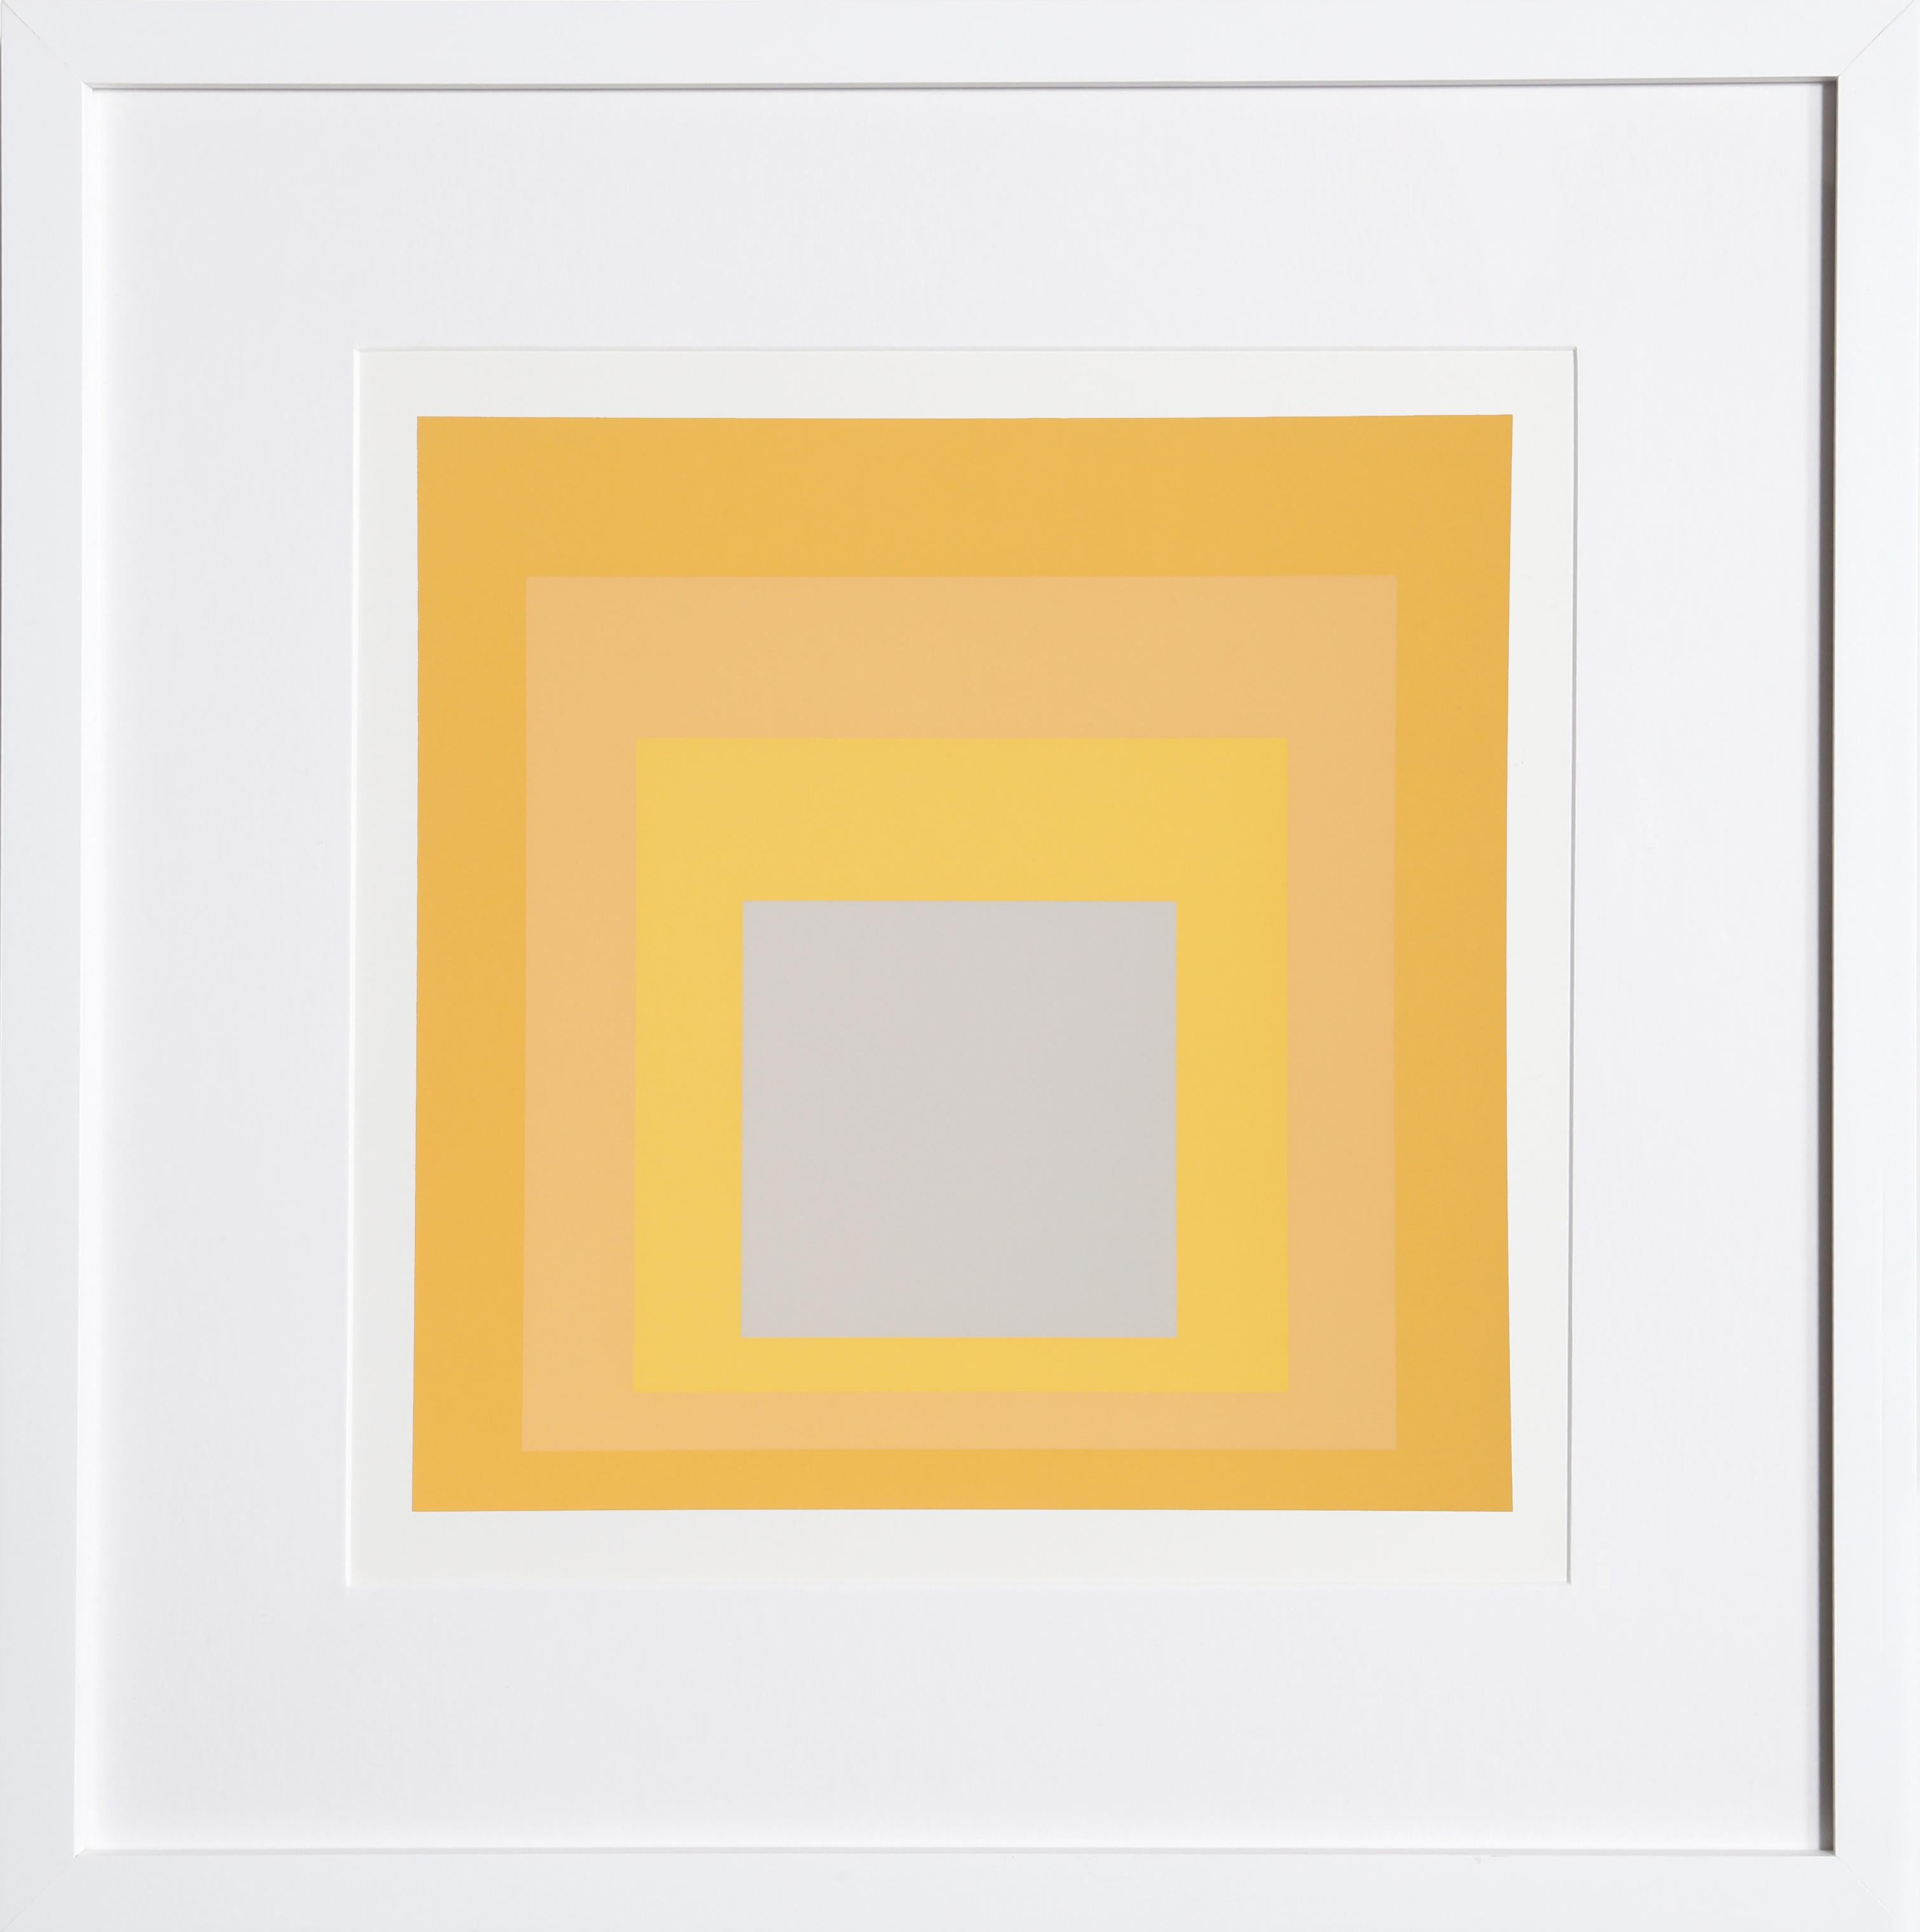 Abstract Print Josef Albers - Hommage à la place - P1, F19, I2